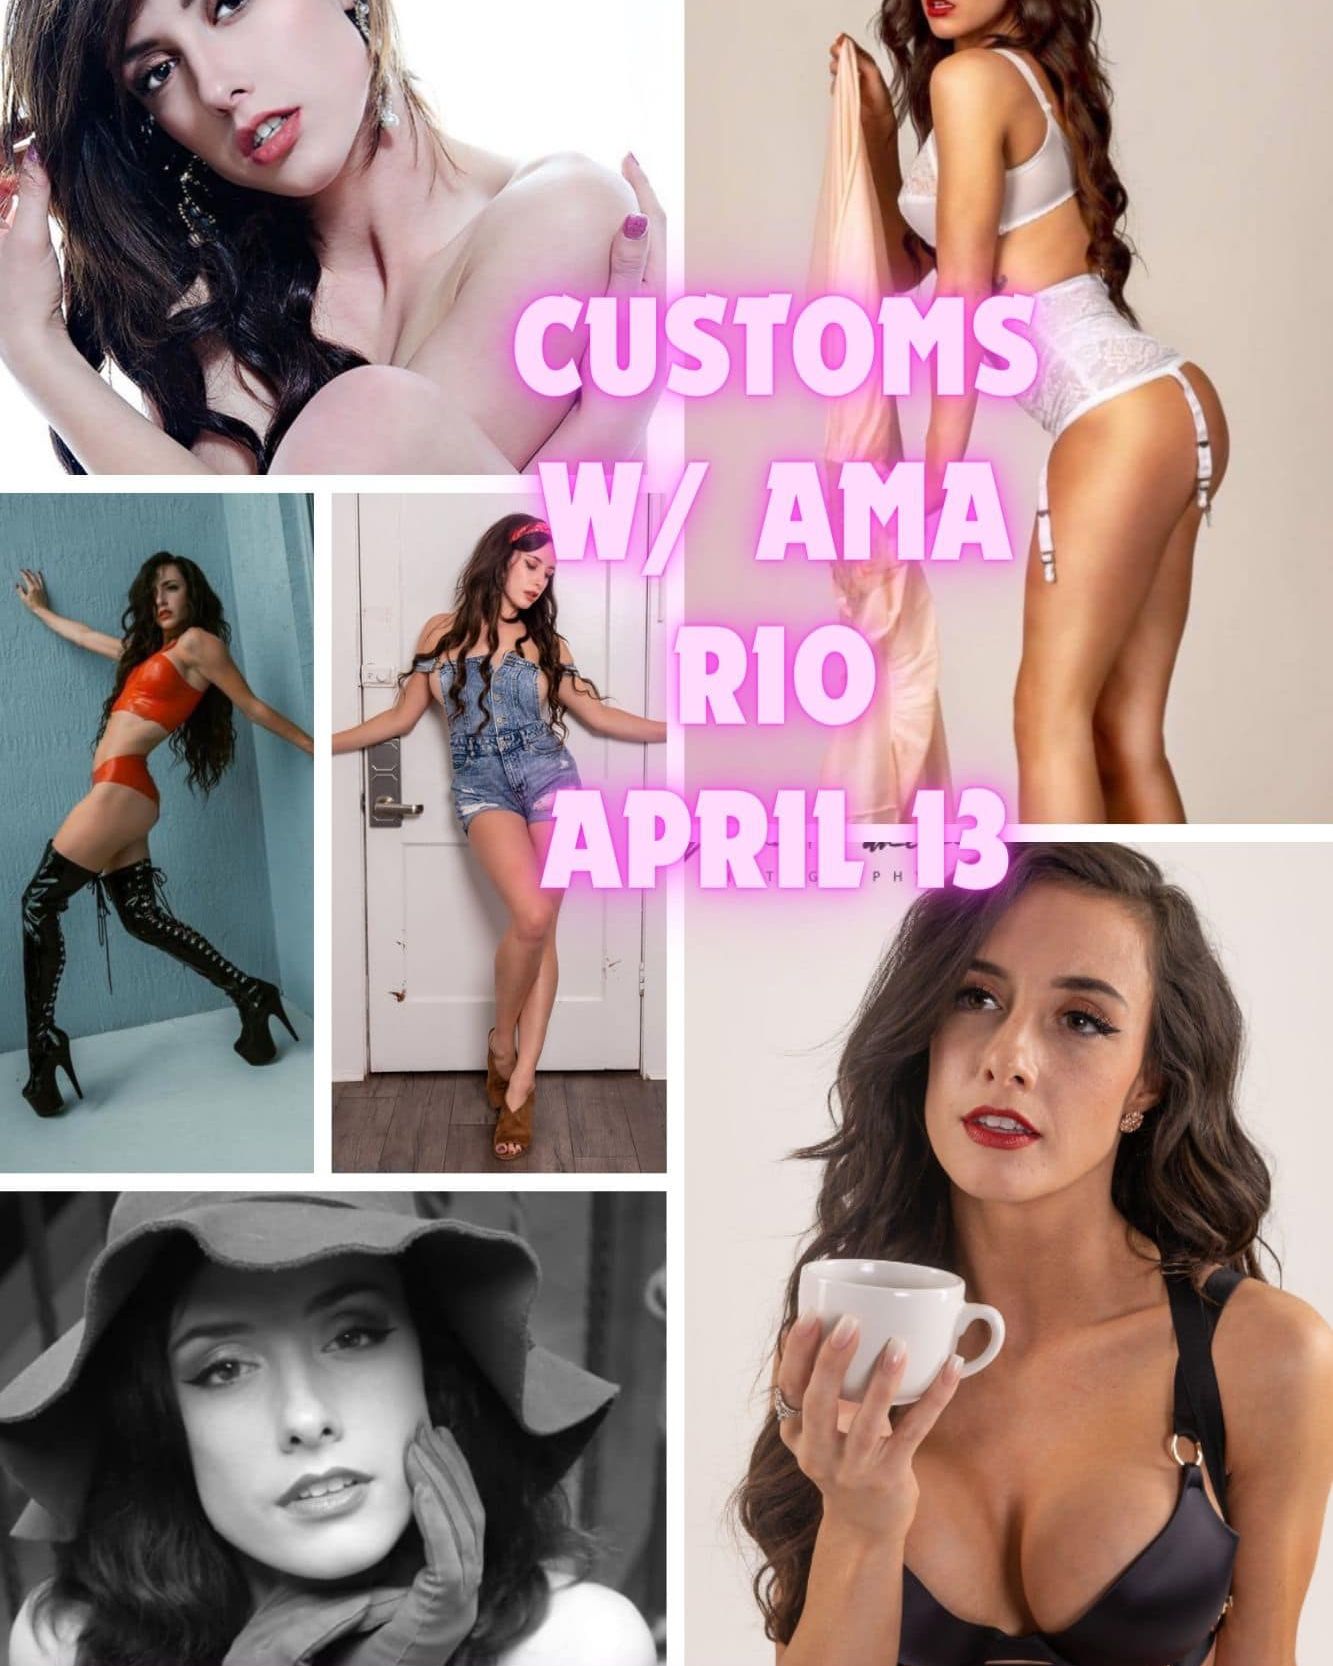 Attention Feybies! 📣
Last chances to order a custom from Ziva Fey’s Fantasies! I have some SEXY, TALENTED, models in the upcoming roster. Pls DM or EMAIL your script/outline to inquire 📹💋
4/13- @ama_rioxxx 
4/14-15- @thetylerlynn 
4/17-18- @missvelvets 
4/20- @TheKatVanWylder